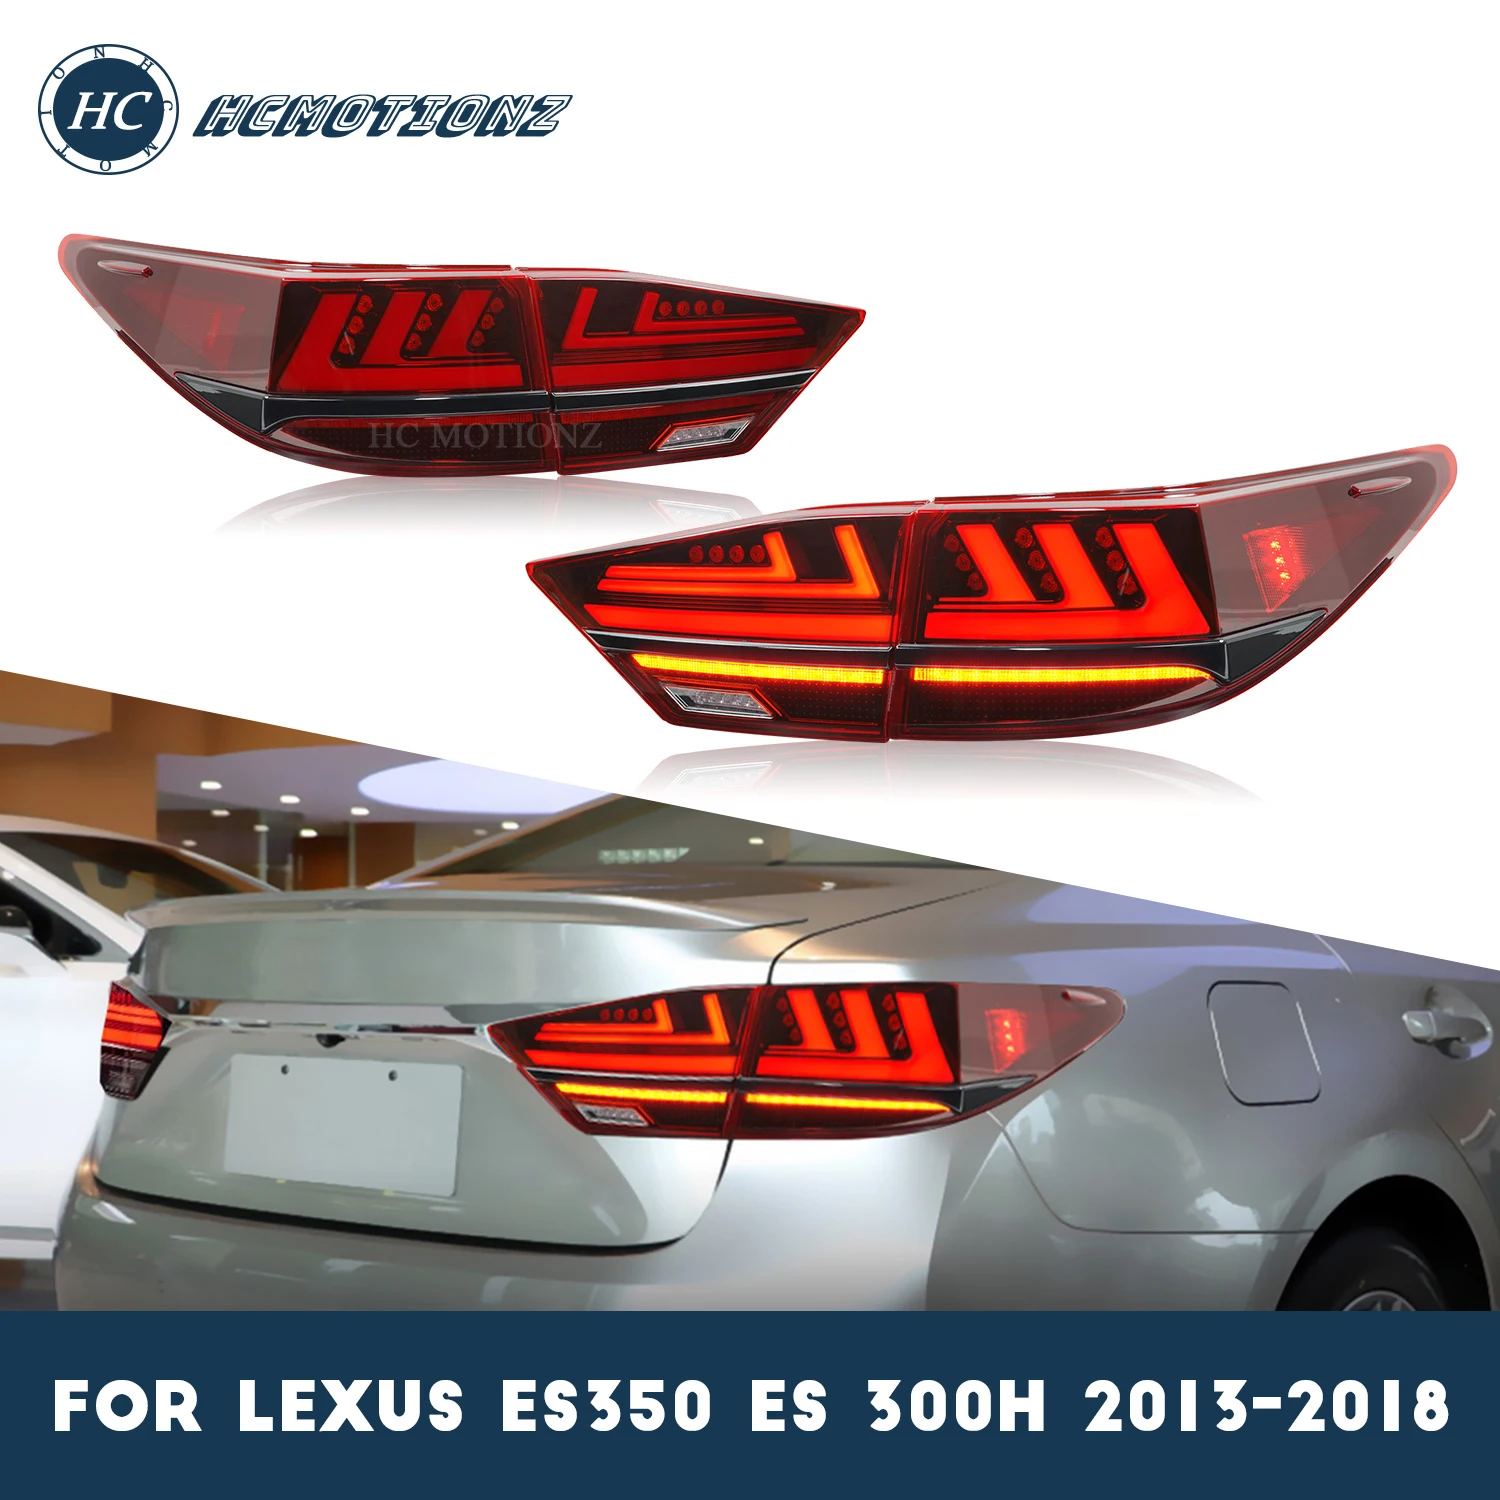 

HCmotion LED Car Tail Light for Lexus ES350 ES 300h 2013-2018 Styling Rear Back Lamps Accessories DRL Start Animation Assembly